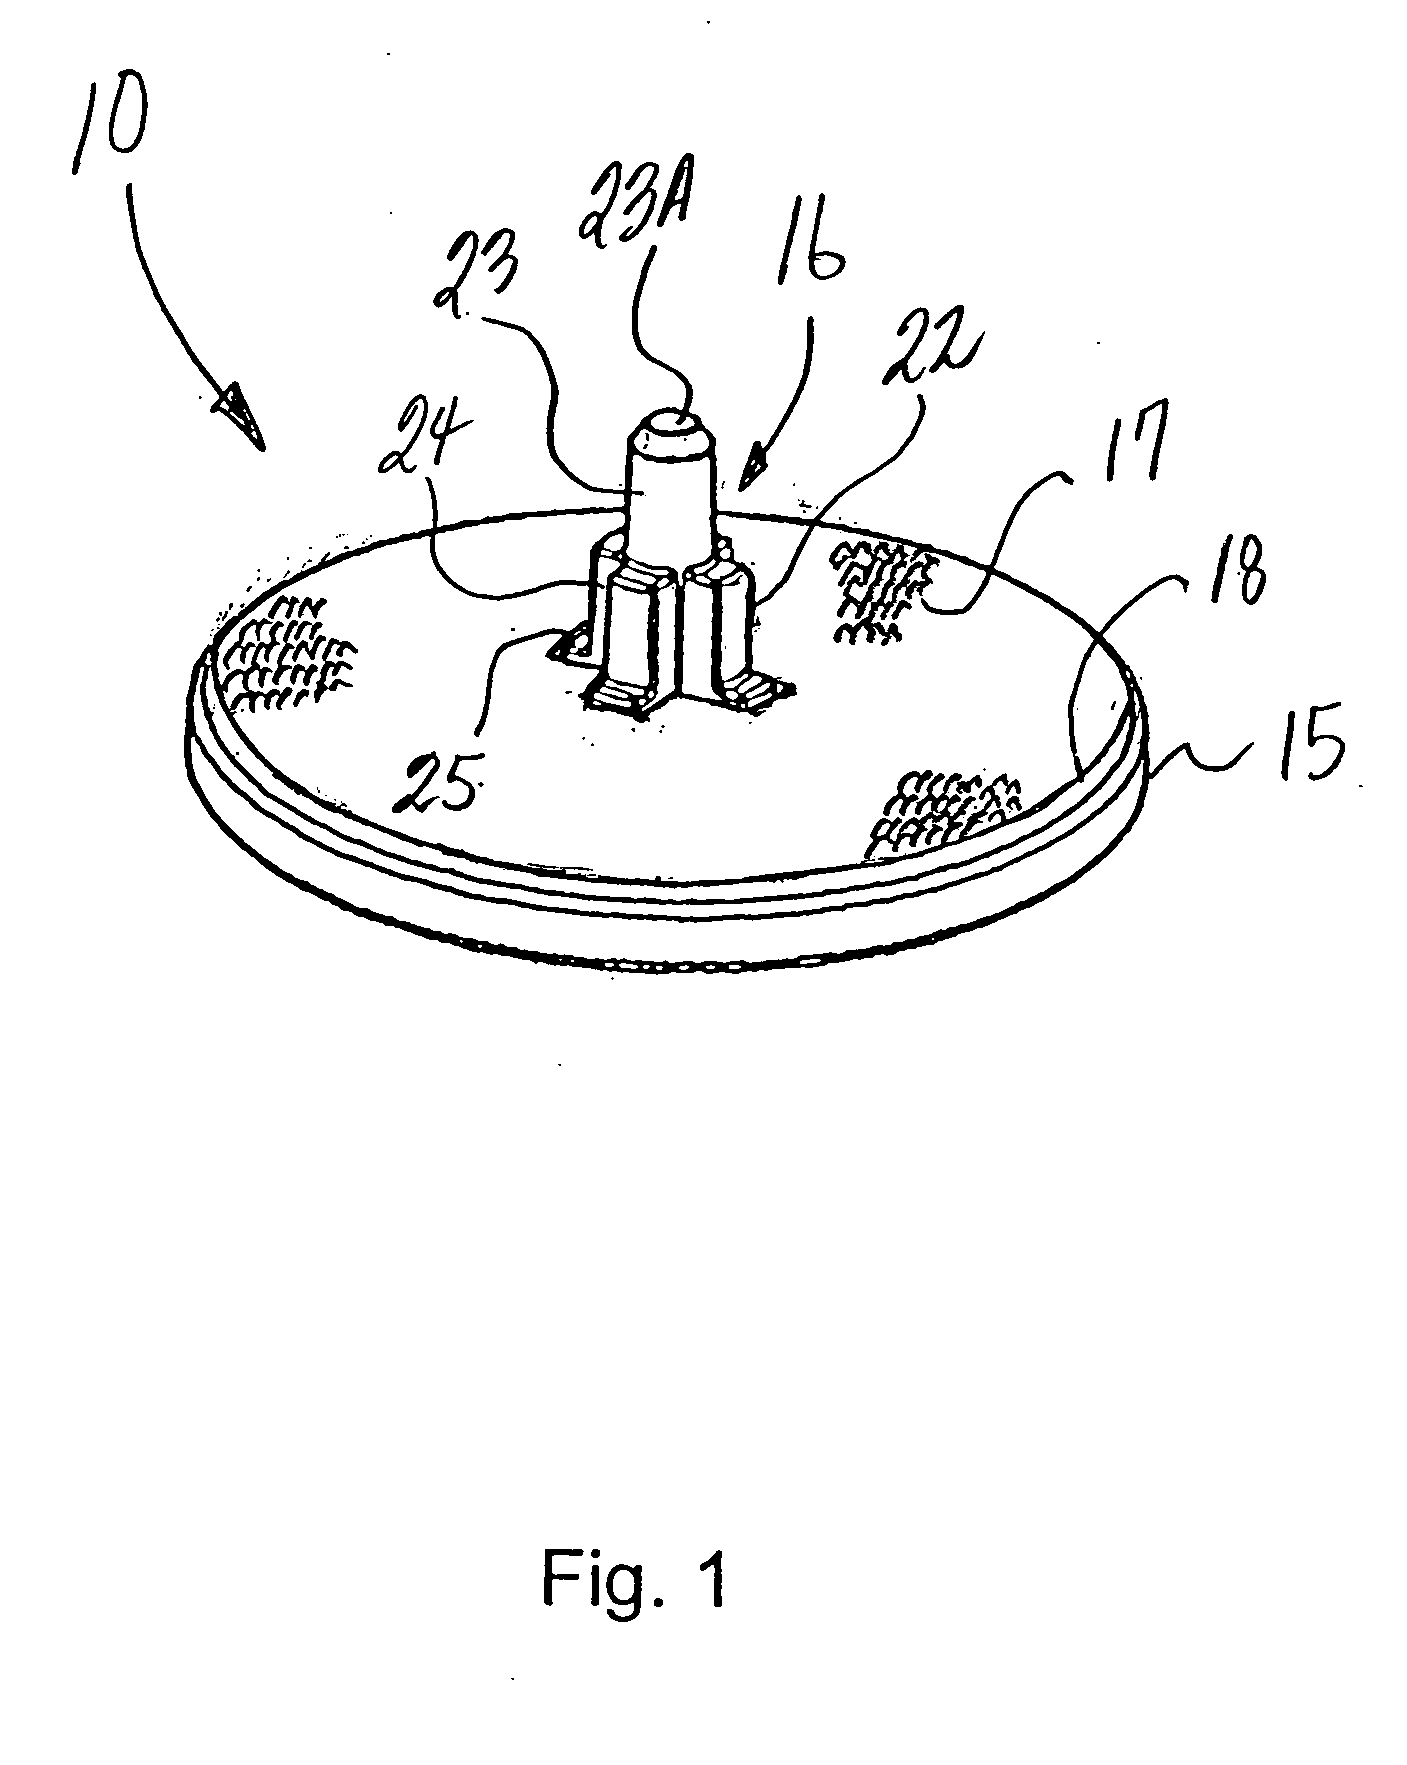 Electrode holder, headwear, and wire jacket adapted for use in sleep apnea testing